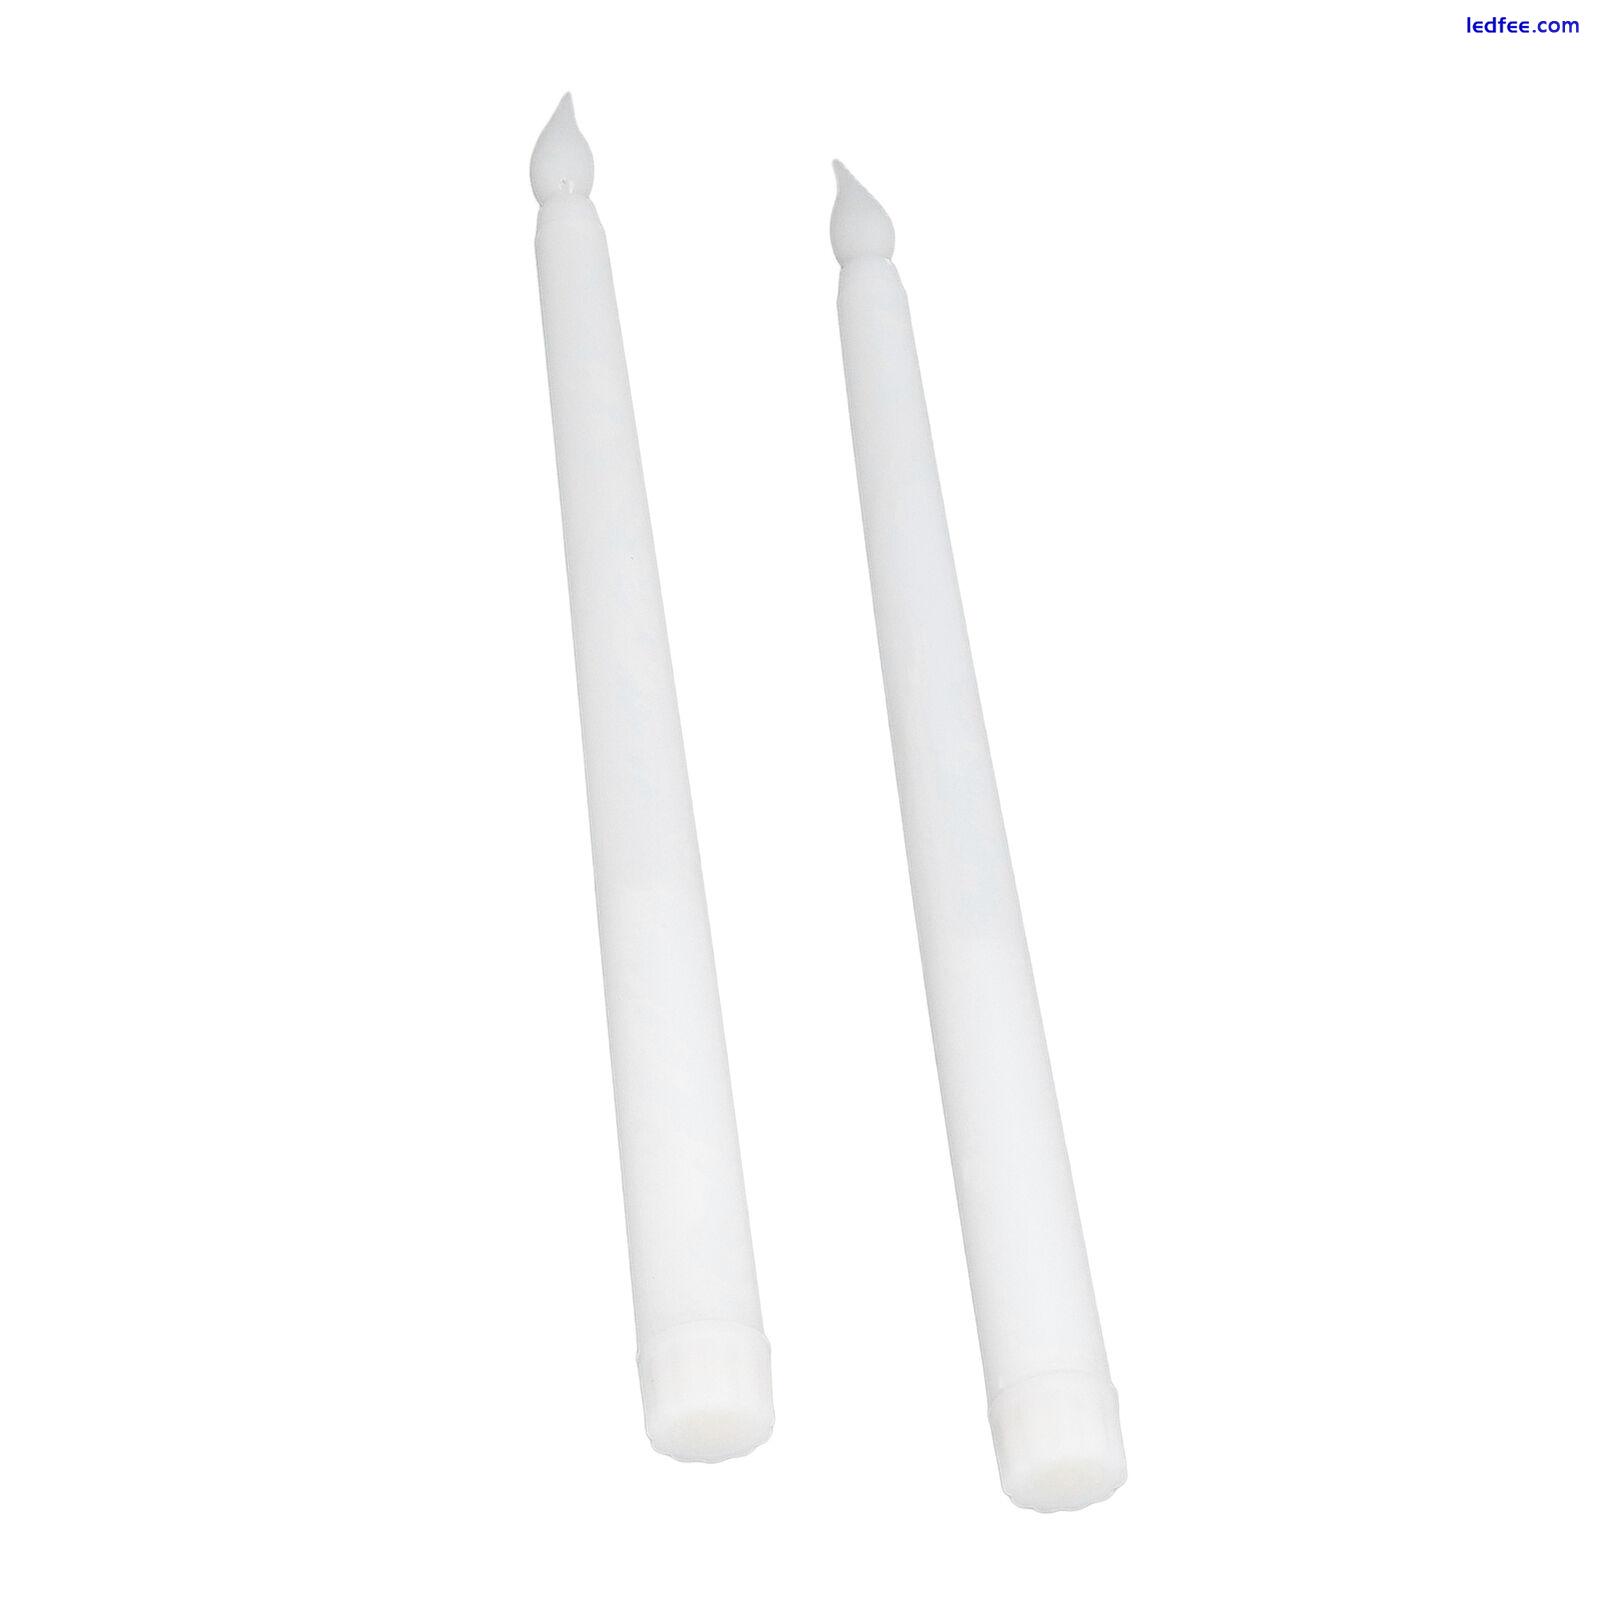 2pcs LED Taper Candles Battery Powered Flameless LED Candle 2 